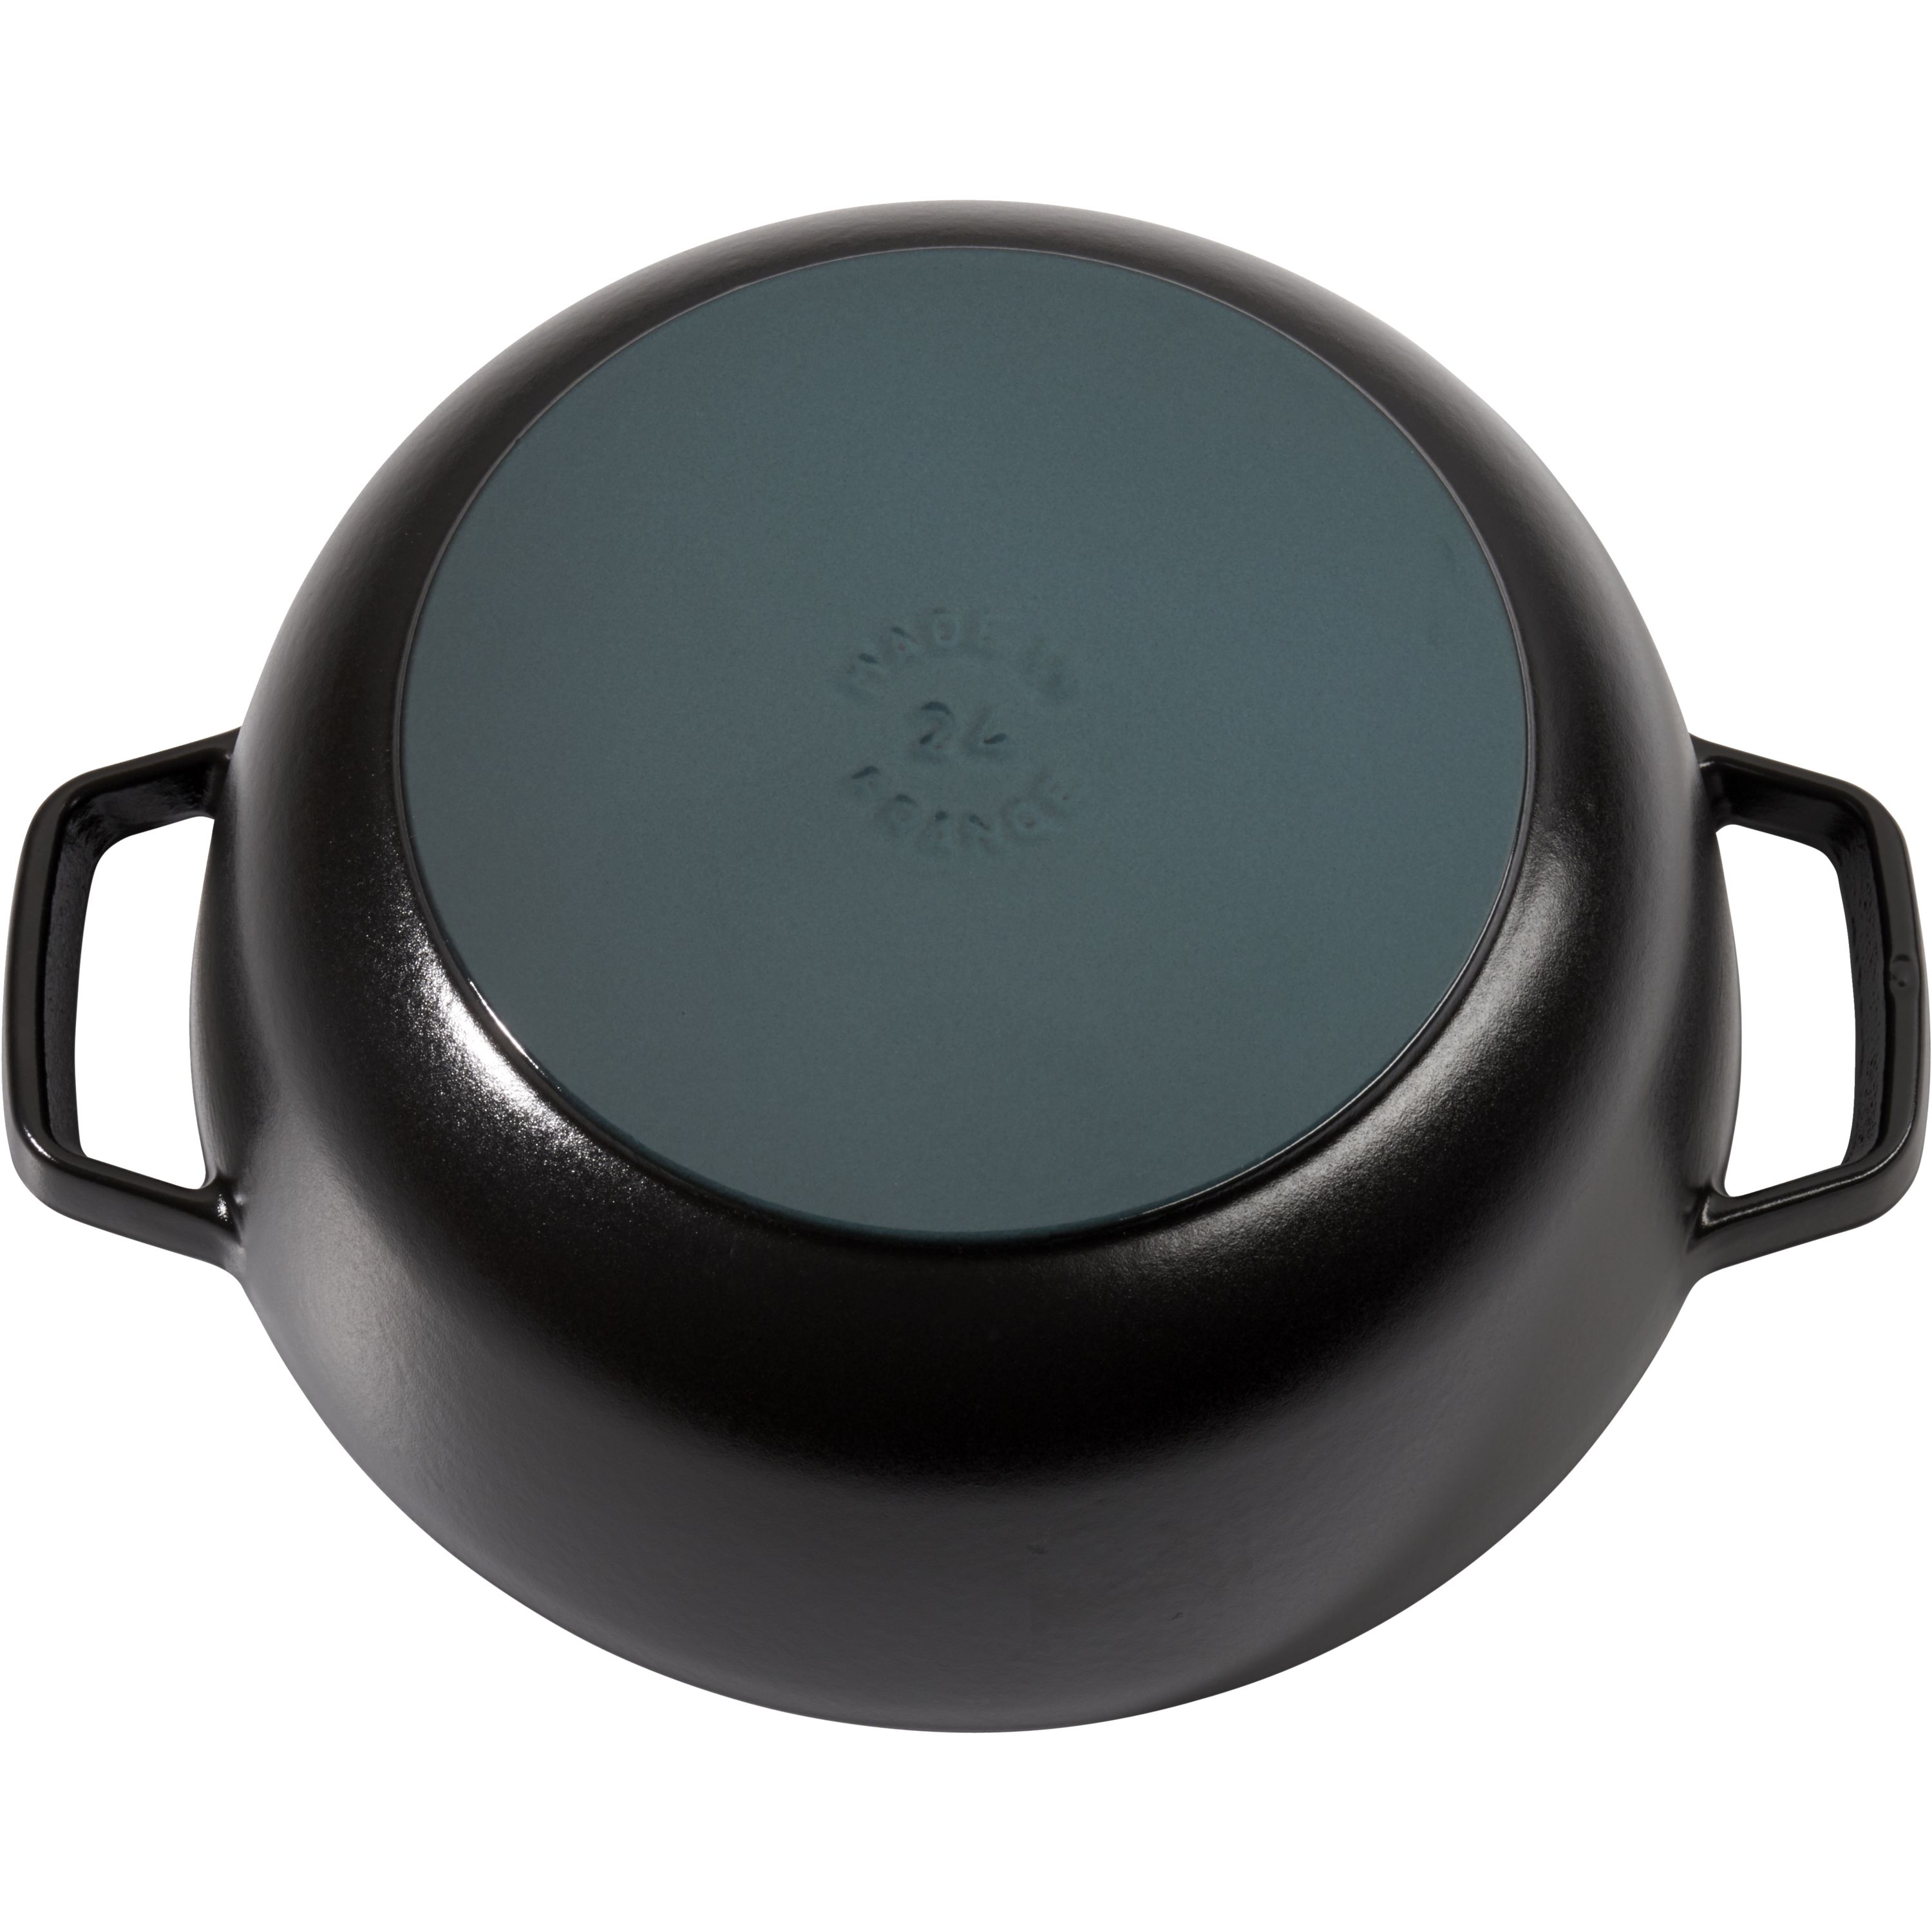 This rice cooker, dreamed up in partnership with French cast iron experts  Staub, is 25% OFF!! The indestructible cast iron, top-notch heat…